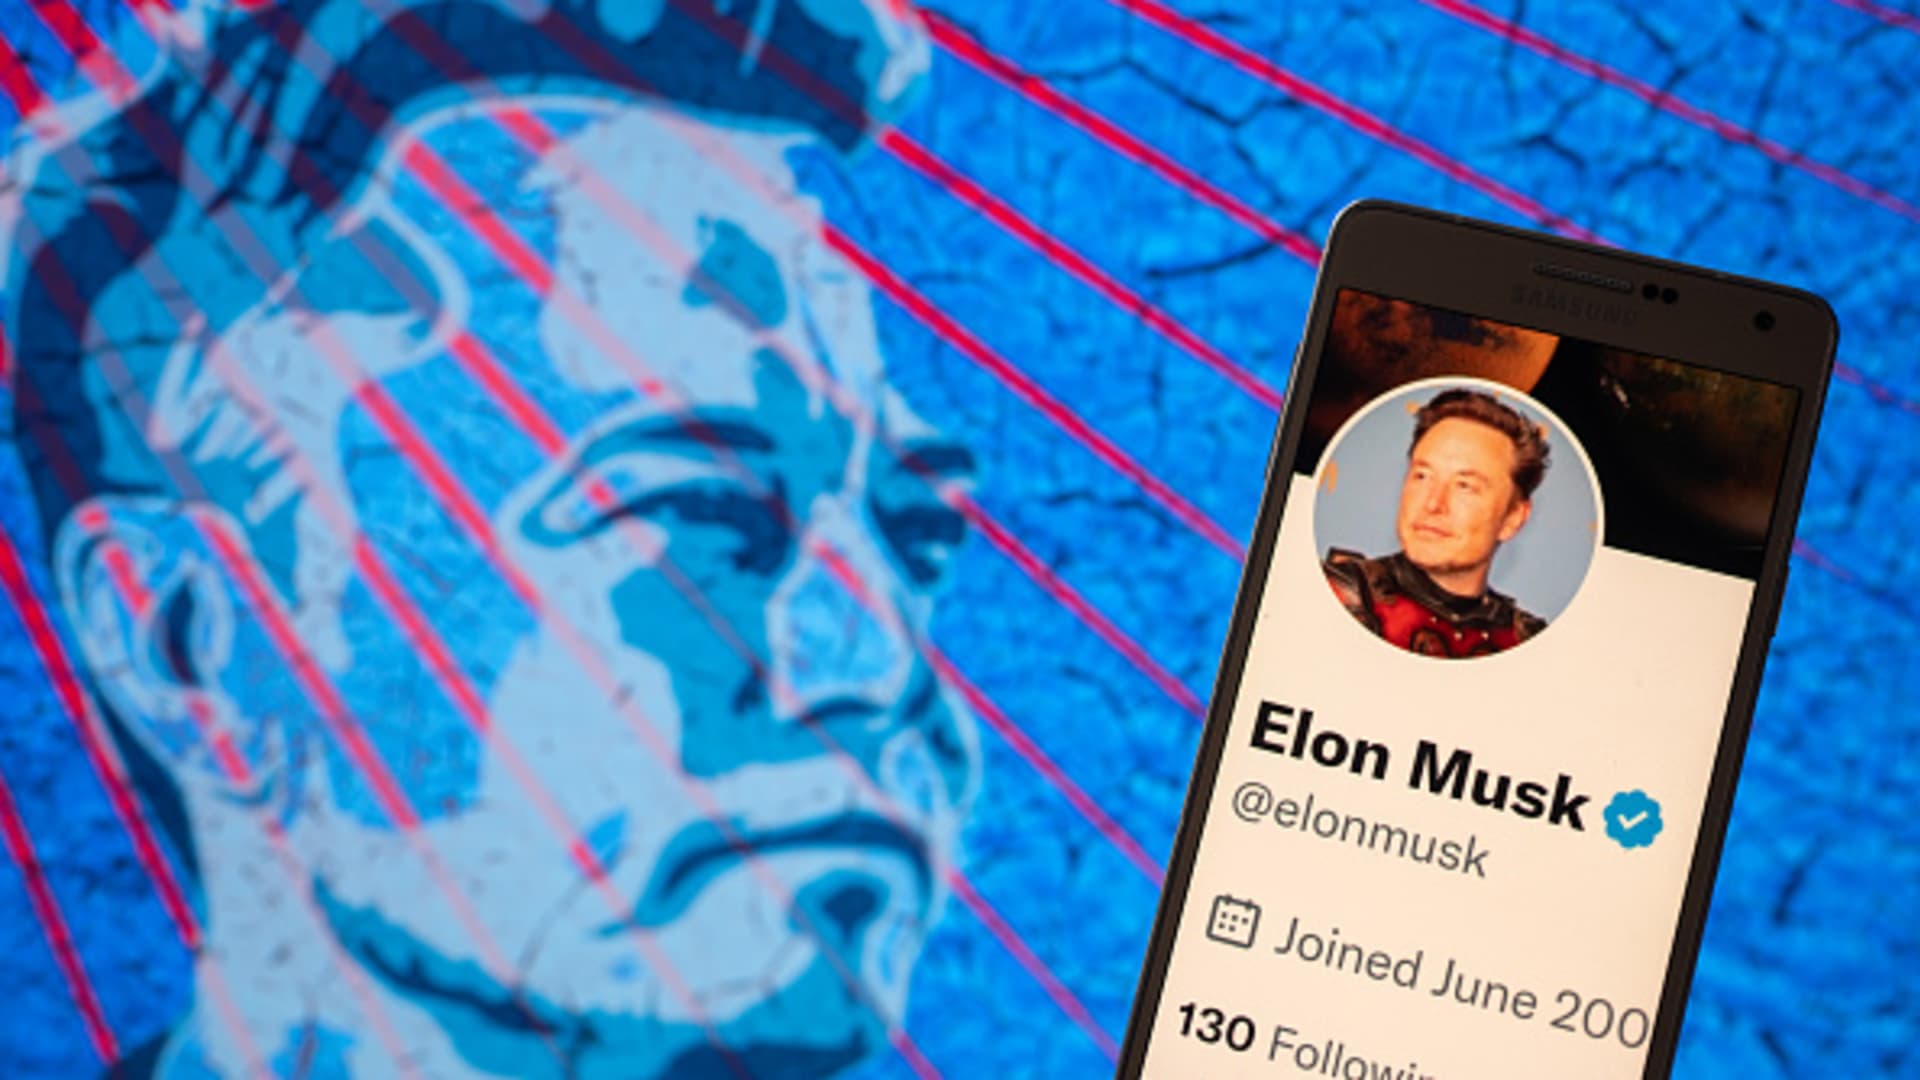 Elon Musk states Twitter is granting ‘amnesty’ to suspended accounts